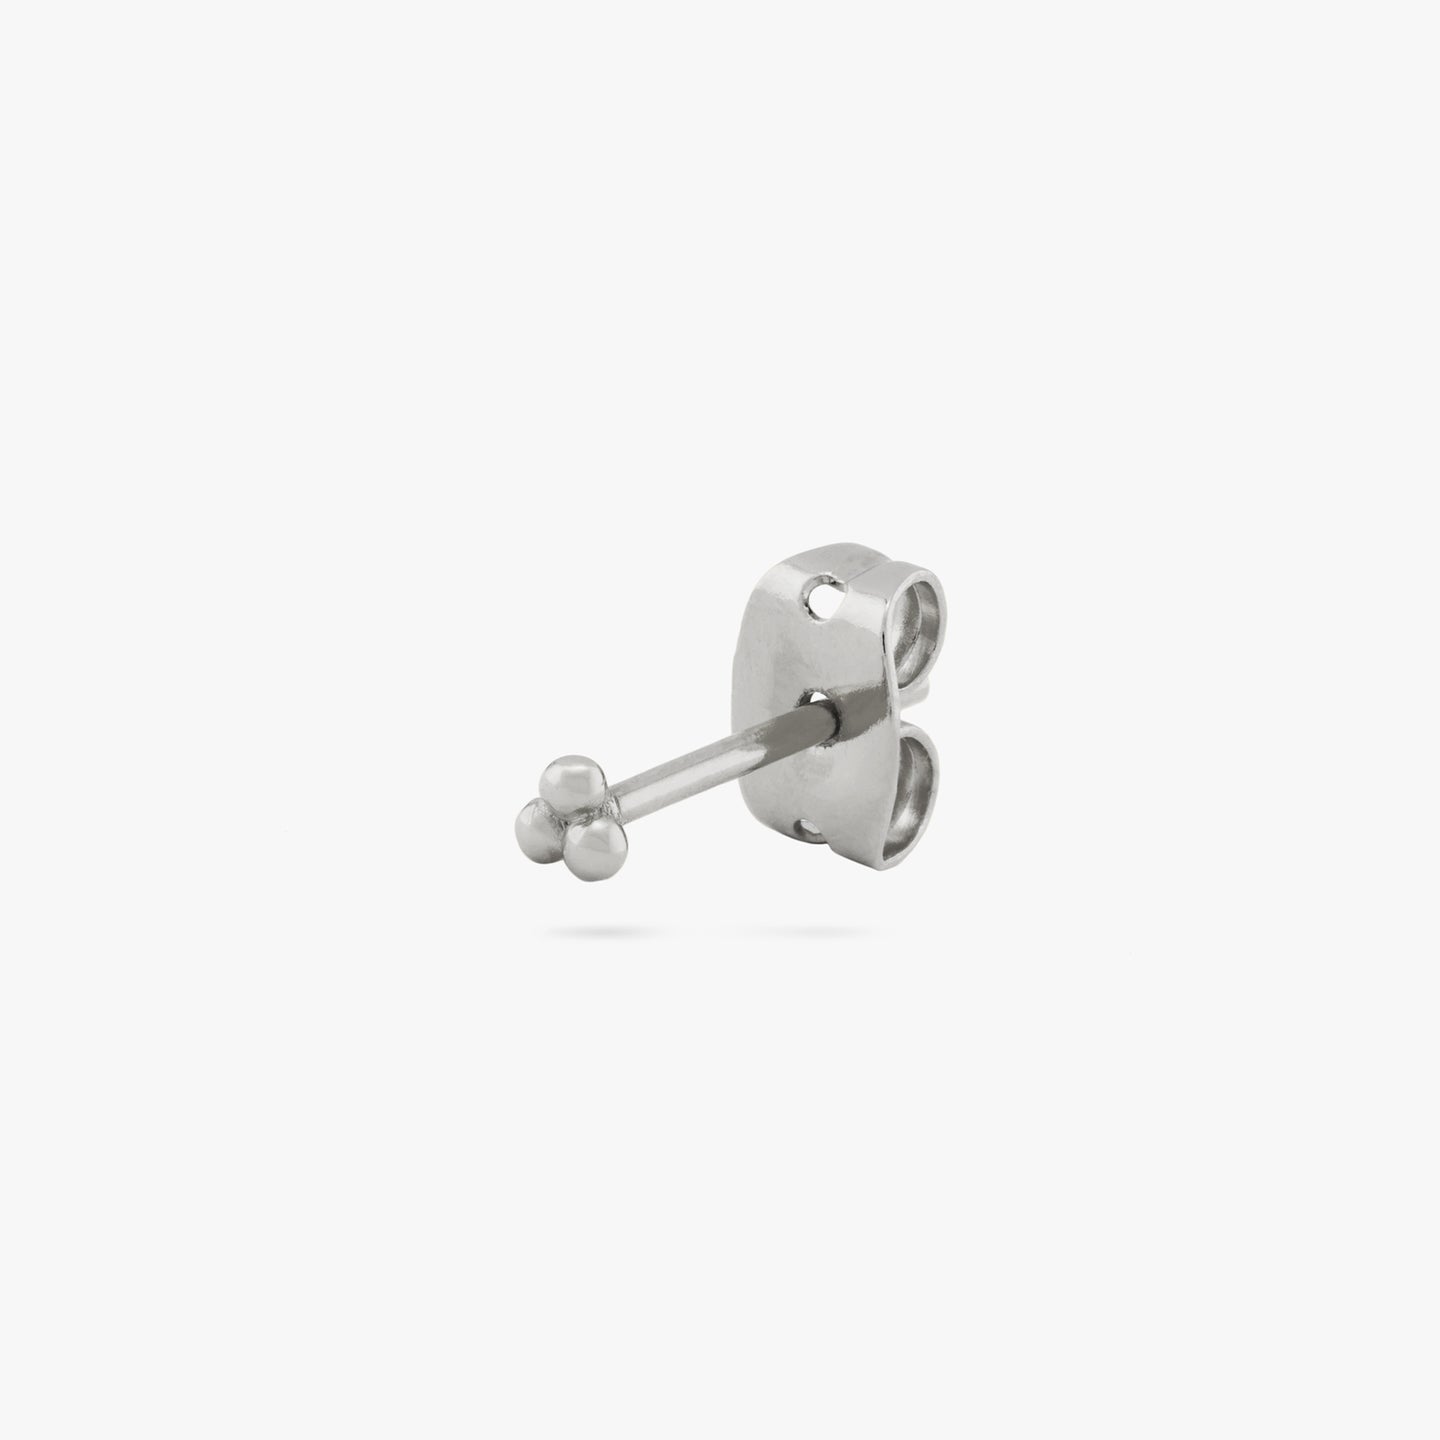 This is a small silver stud of three beads arranged in a cluster color:null|silver